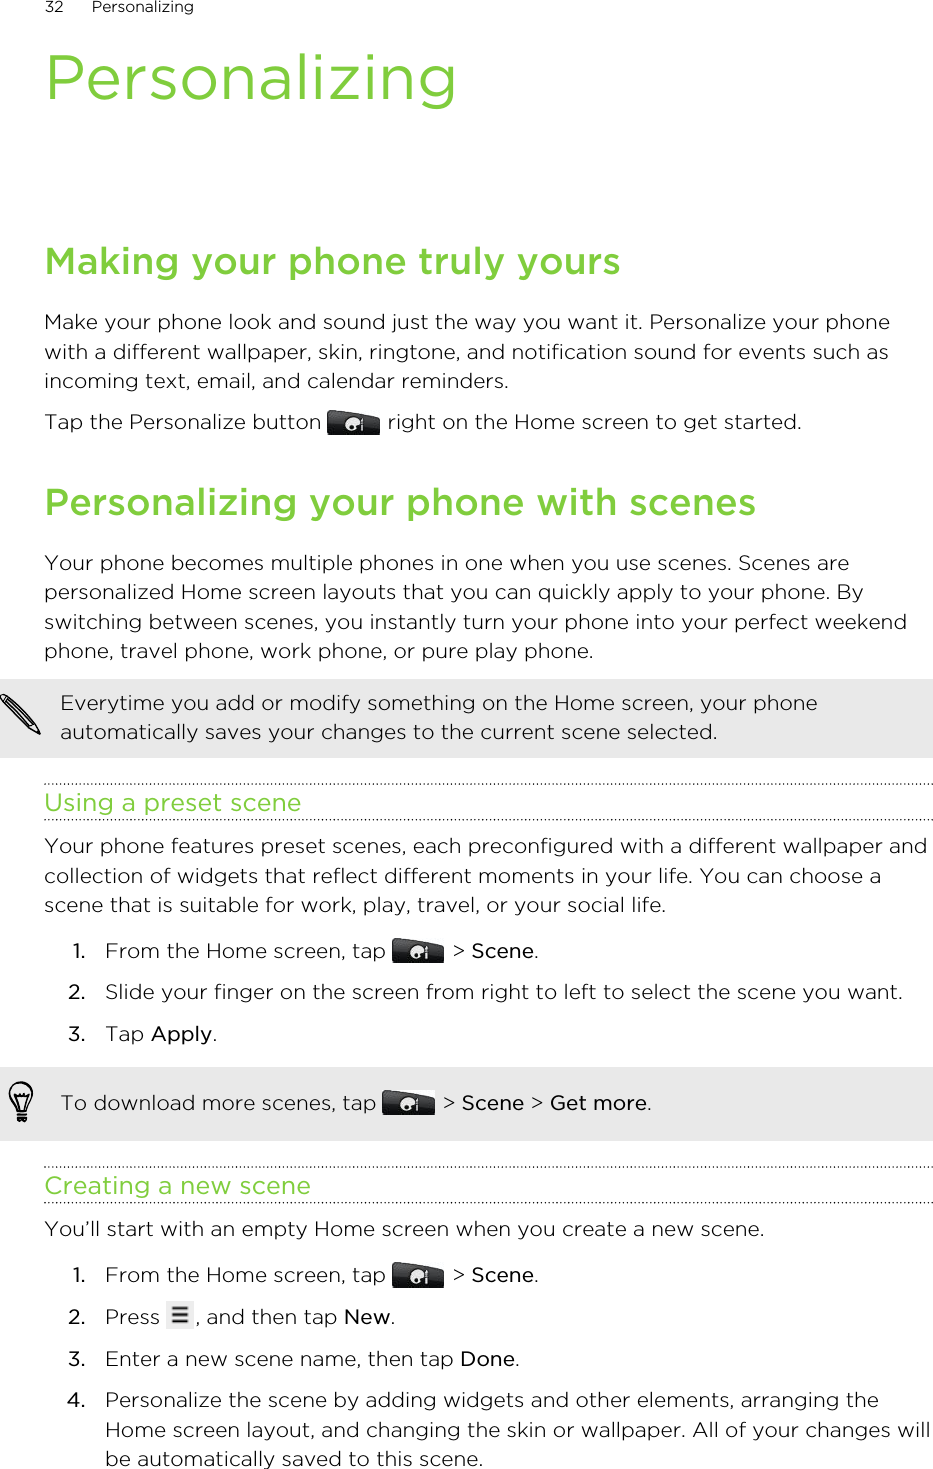 PersonalizingMaking your phone truly yoursMake your phone look and sound just the way you want it. Personalize your phonewith a different wallpaper, skin, ringtone, and notification sound for events such asincoming text, email, and calendar reminders.Tap the Personalize button   right on the Home screen to get started.Personalizing your phone with scenesYour phone becomes multiple phones in one when you use scenes. Scenes arepersonalized Home screen layouts that you can quickly apply to your phone. Byswitching between scenes, you instantly turn your phone into your perfect weekendphone, travel phone, work phone, or pure play phone.Everytime you add or modify something on the Home screen, your phoneautomatically saves your changes to the current scene selected.Using a preset sceneYour phone features preset scenes, each preconfigured with a different wallpaper andcollection of widgets that reflect different moments in your life. You can choose ascene that is suitable for work, play, travel, or your social life.1. From the Home screen, tap   &gt; Scene.2. Slide your finger on the screen from right to left to select the scene you want.3. Tap Apply.To download more scenes, tap   &gt; Scene &gt; Get more.Creating a new sceneYou’ll start with an empty Home screen when you create a new scene.1. From the Home screen, tap   &gt; Scene.2. Press  , and then tap New.3. Enter a new scene name, then tap Done.4. Personalize the scene by adding widgets and other elements, arranging theHome screen layout, and changing the skin or wallpaper. All of your changes willbe automatically saved to this scene.32 Personalizing